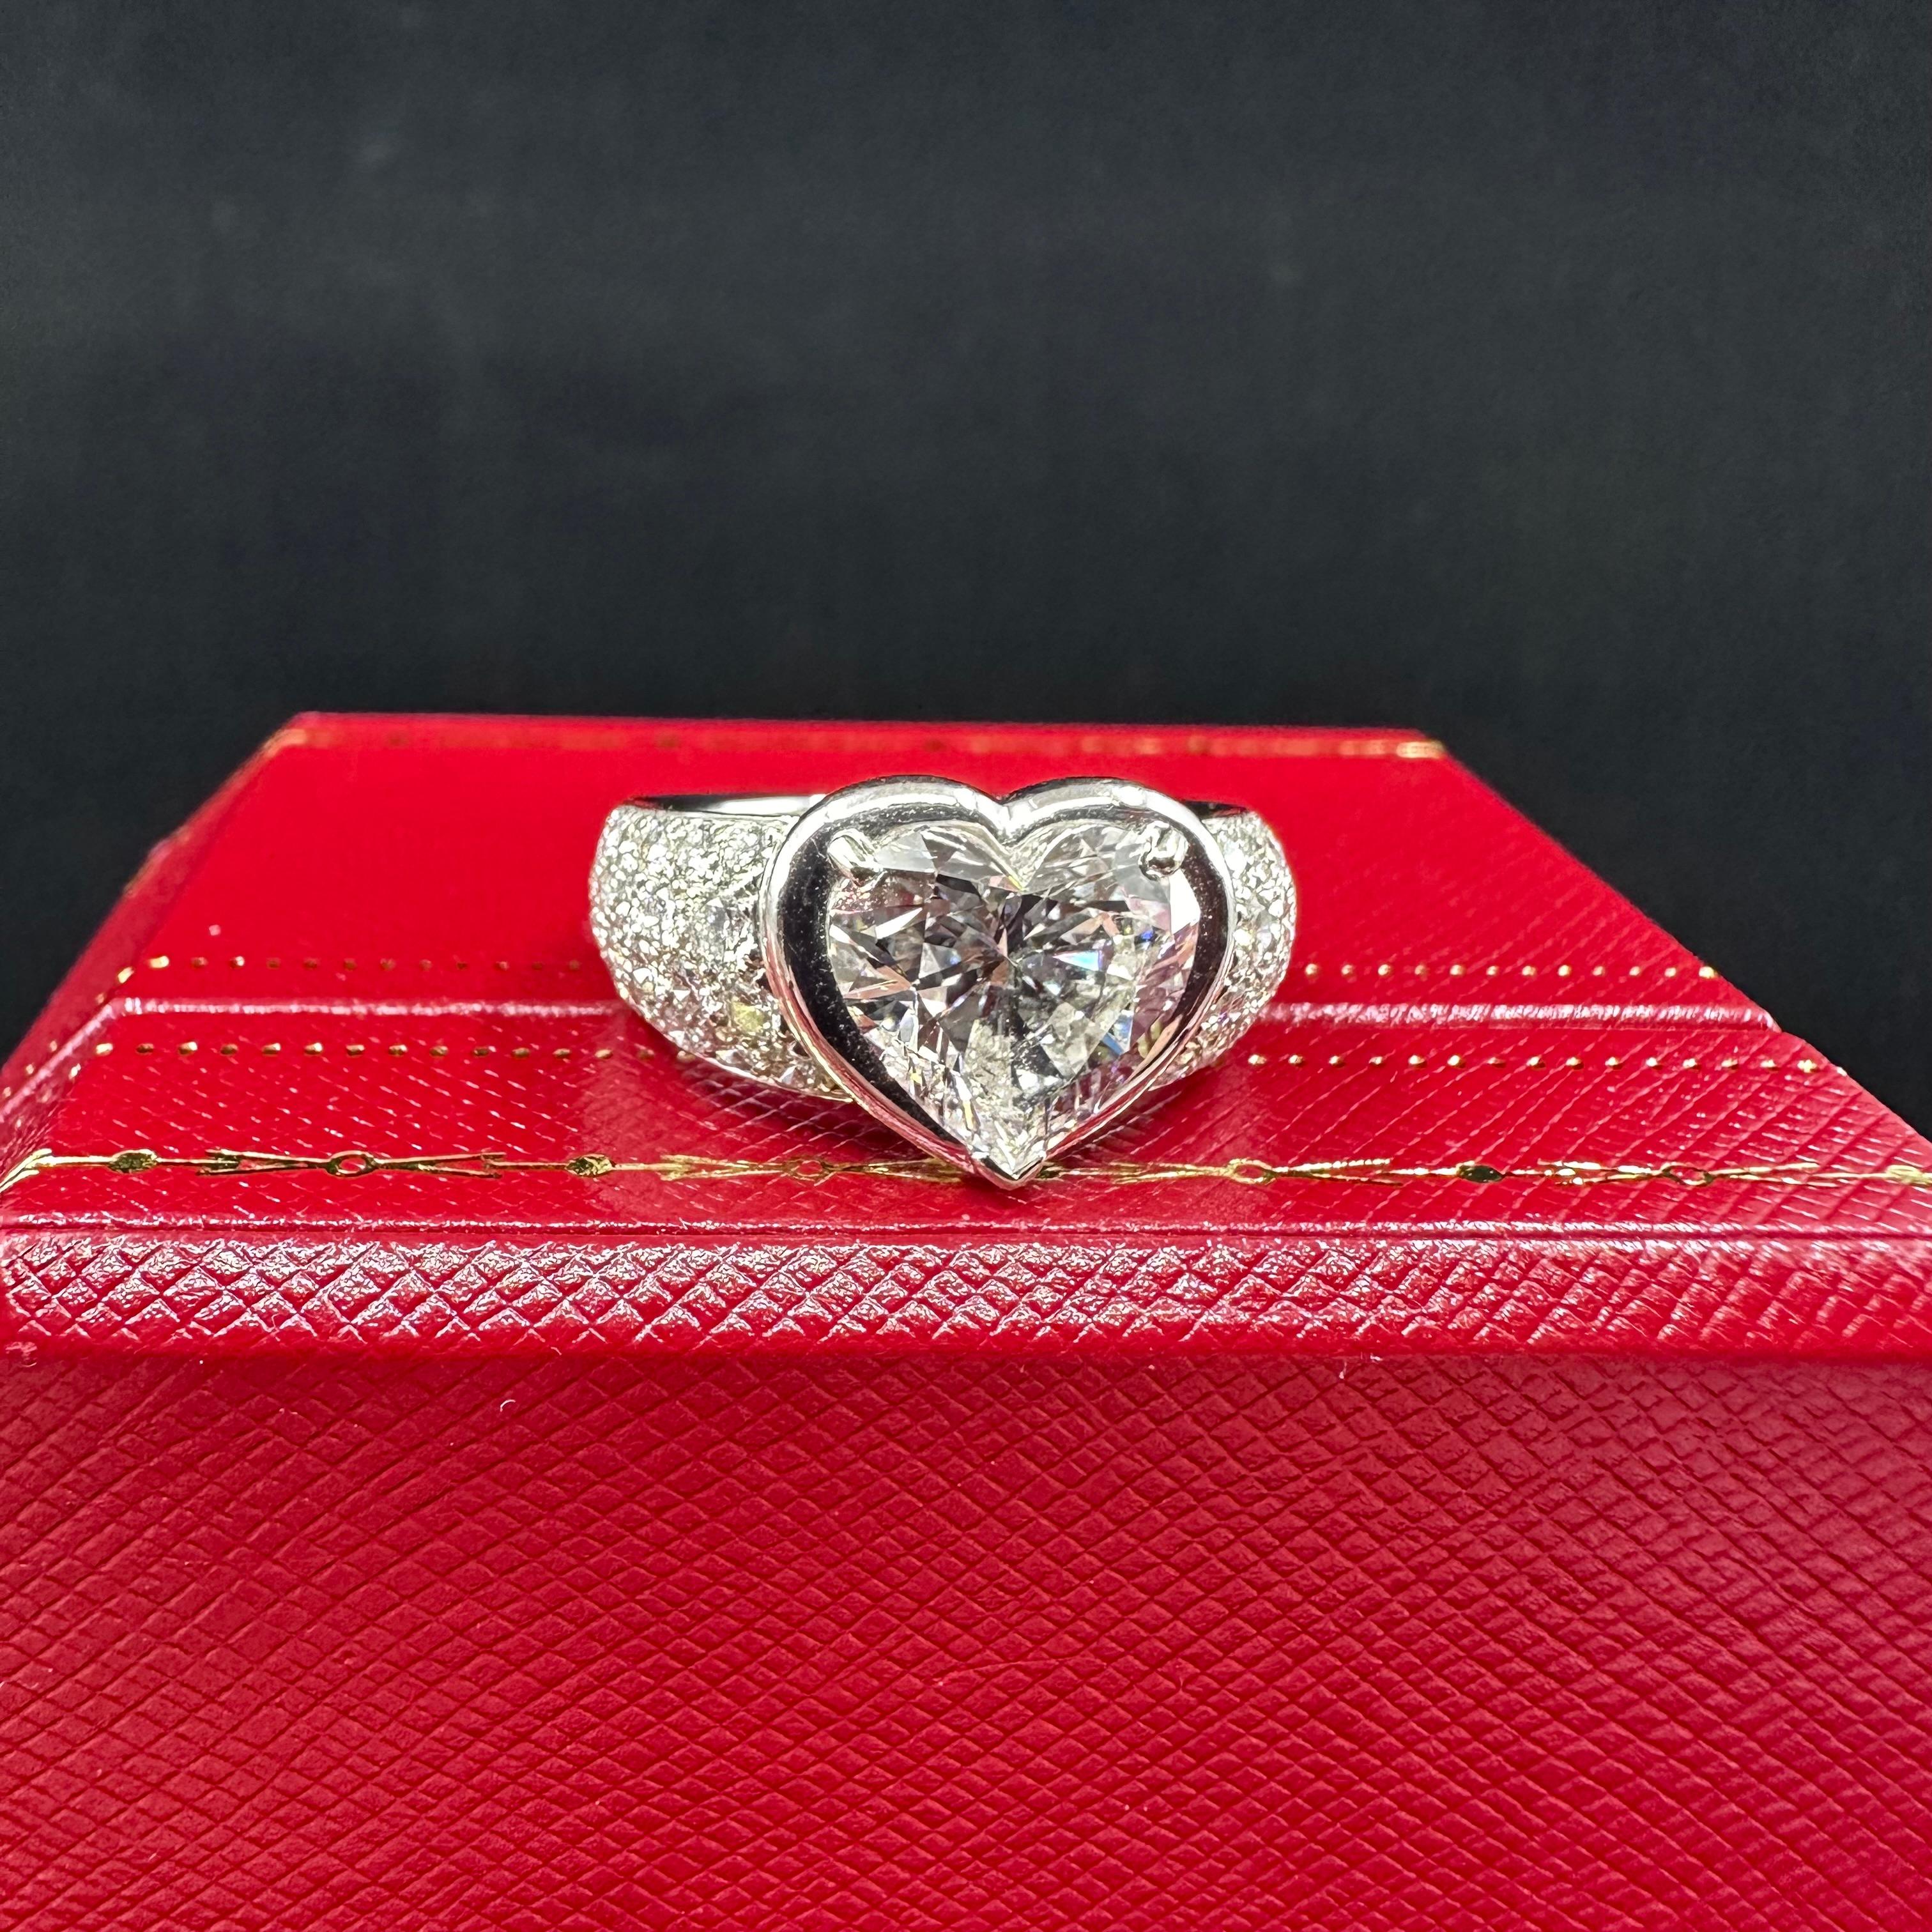 Cartier Paris 3.32 ct D Flawless Diamond Ring  In Excellent Condition For Sale In Beverly Hills, CA